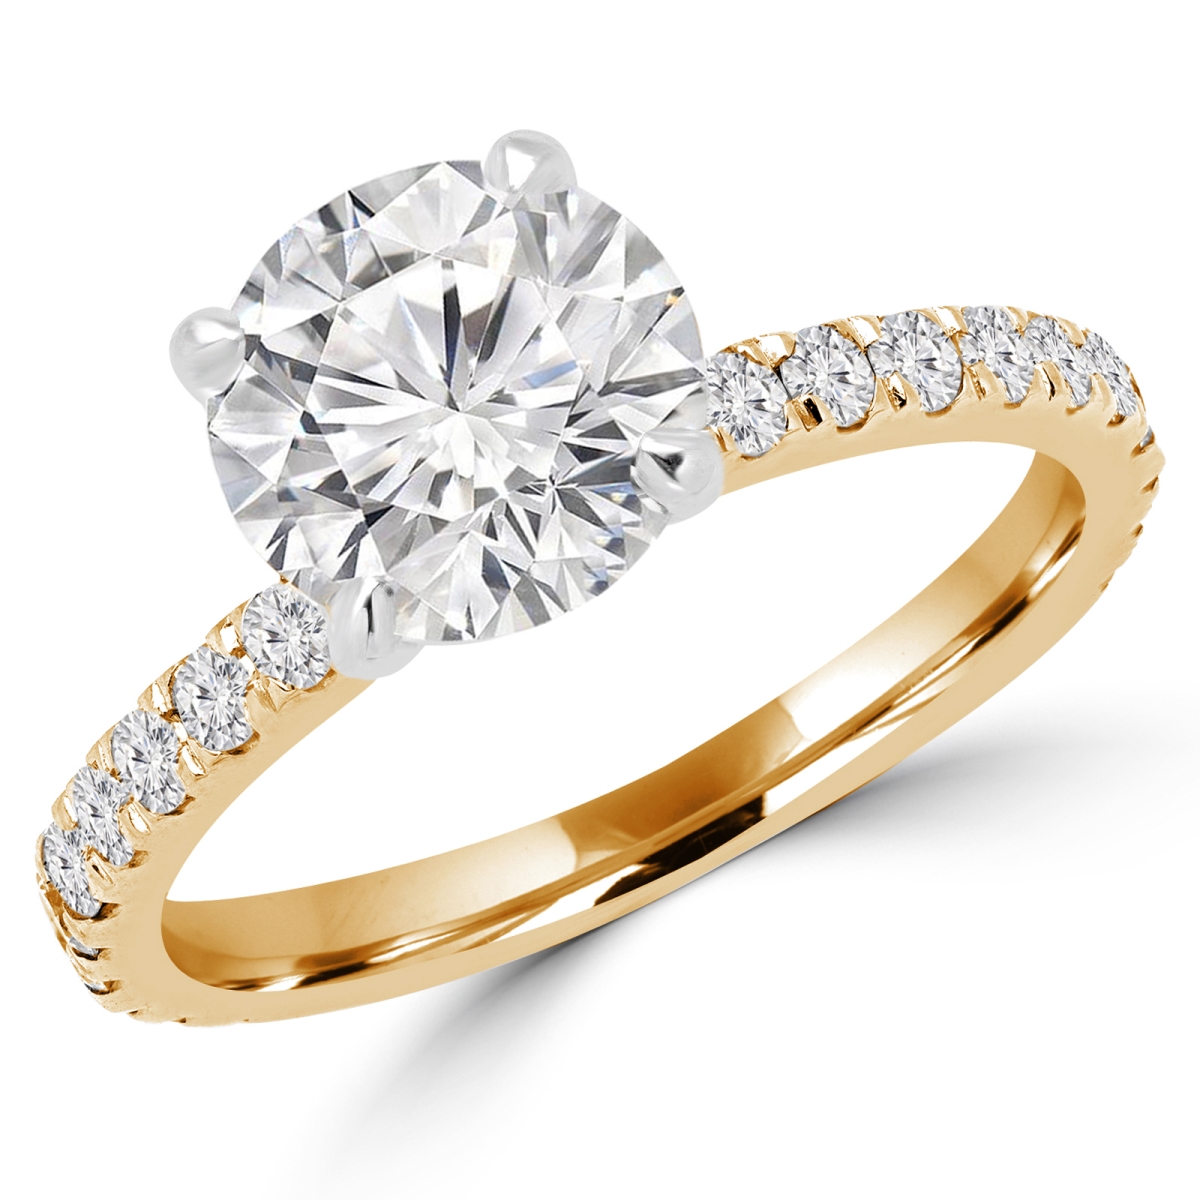 Picture of Majesty Diamonds MD160340-6.75 1 CTW Round Cut Diamond Multi Stone Engagement Ring in 14K Yellow Gold - Size 6.75